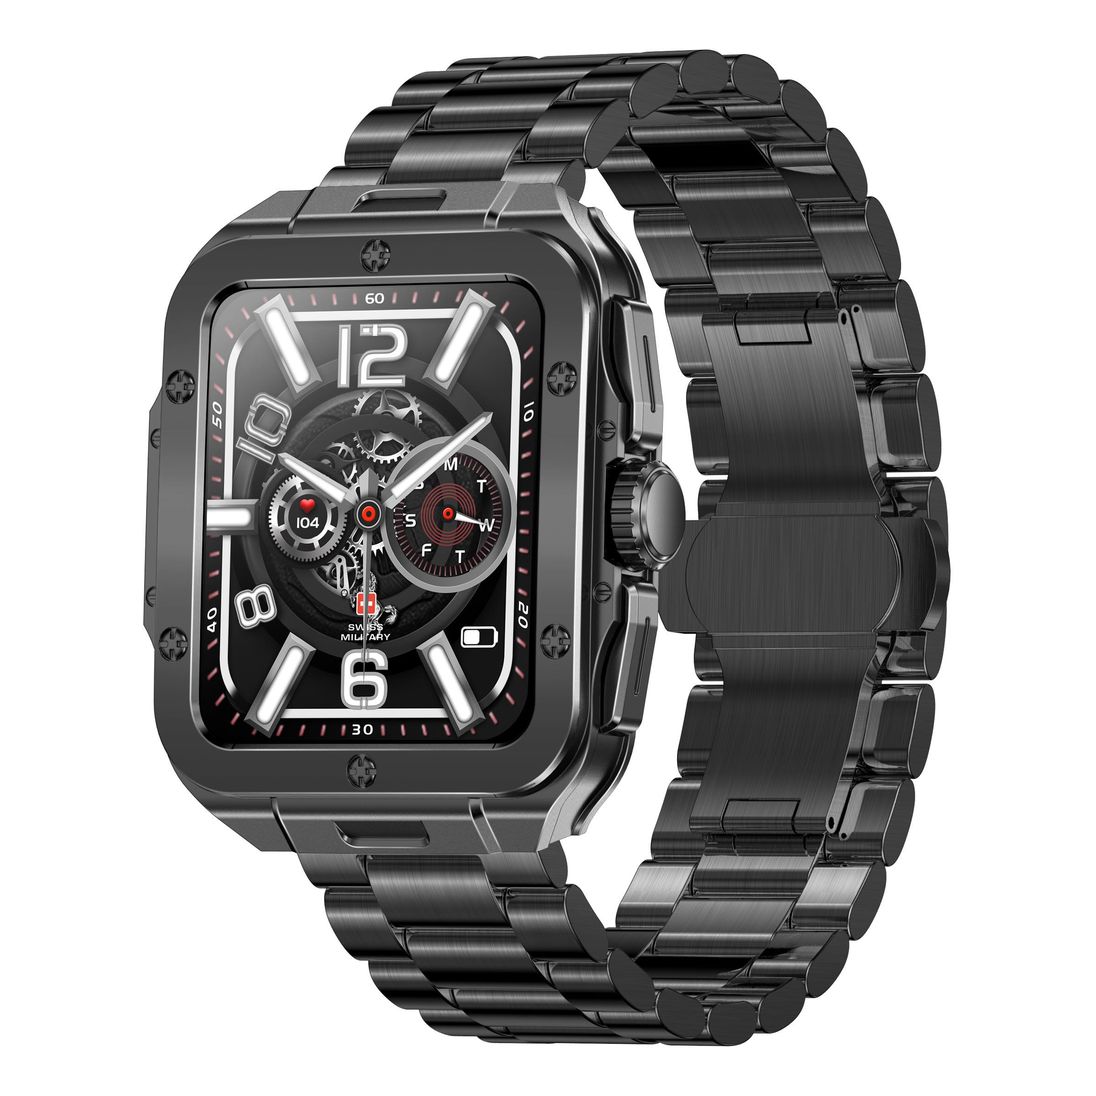 Swiss Military Alps 2 Smartwatch with Gunmetal Frame and Gun StainlessSteel Strap